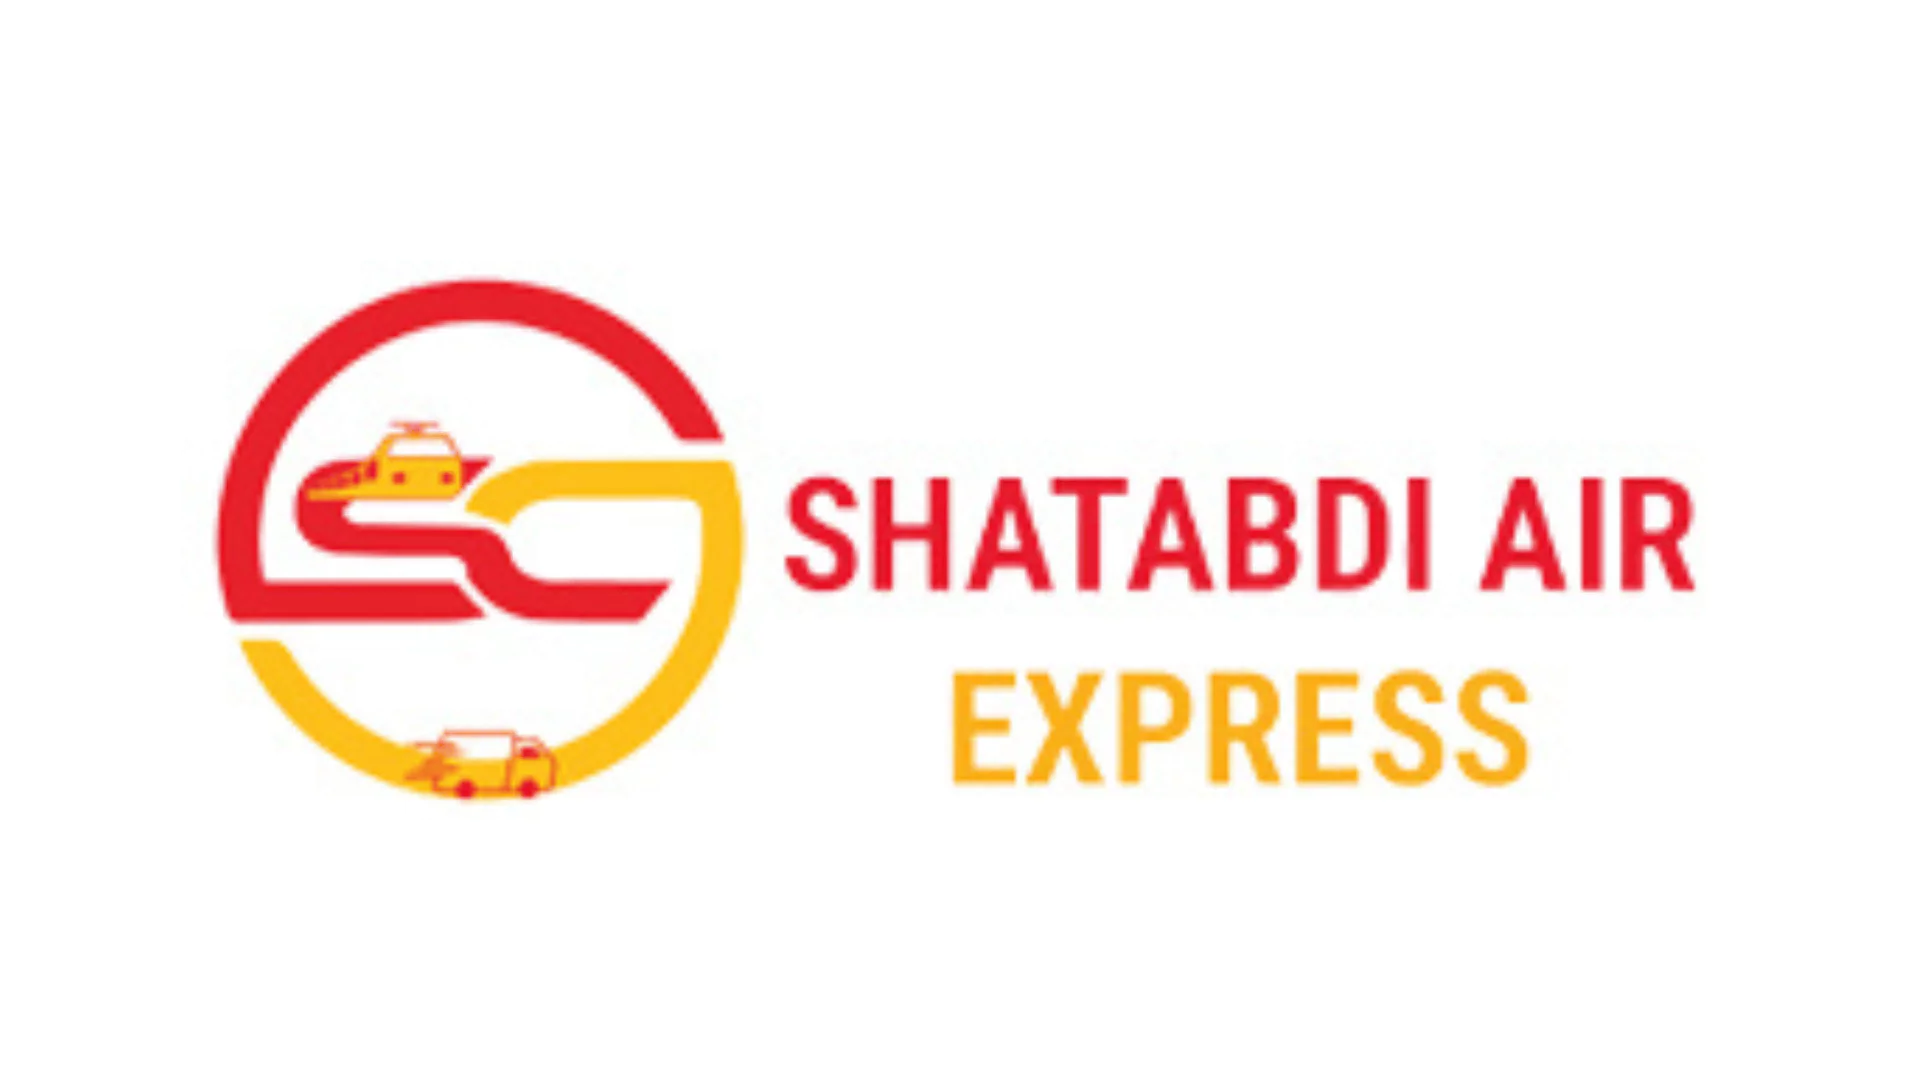 Shatabdi Express Courier Tracking - Track Delivery Status Online